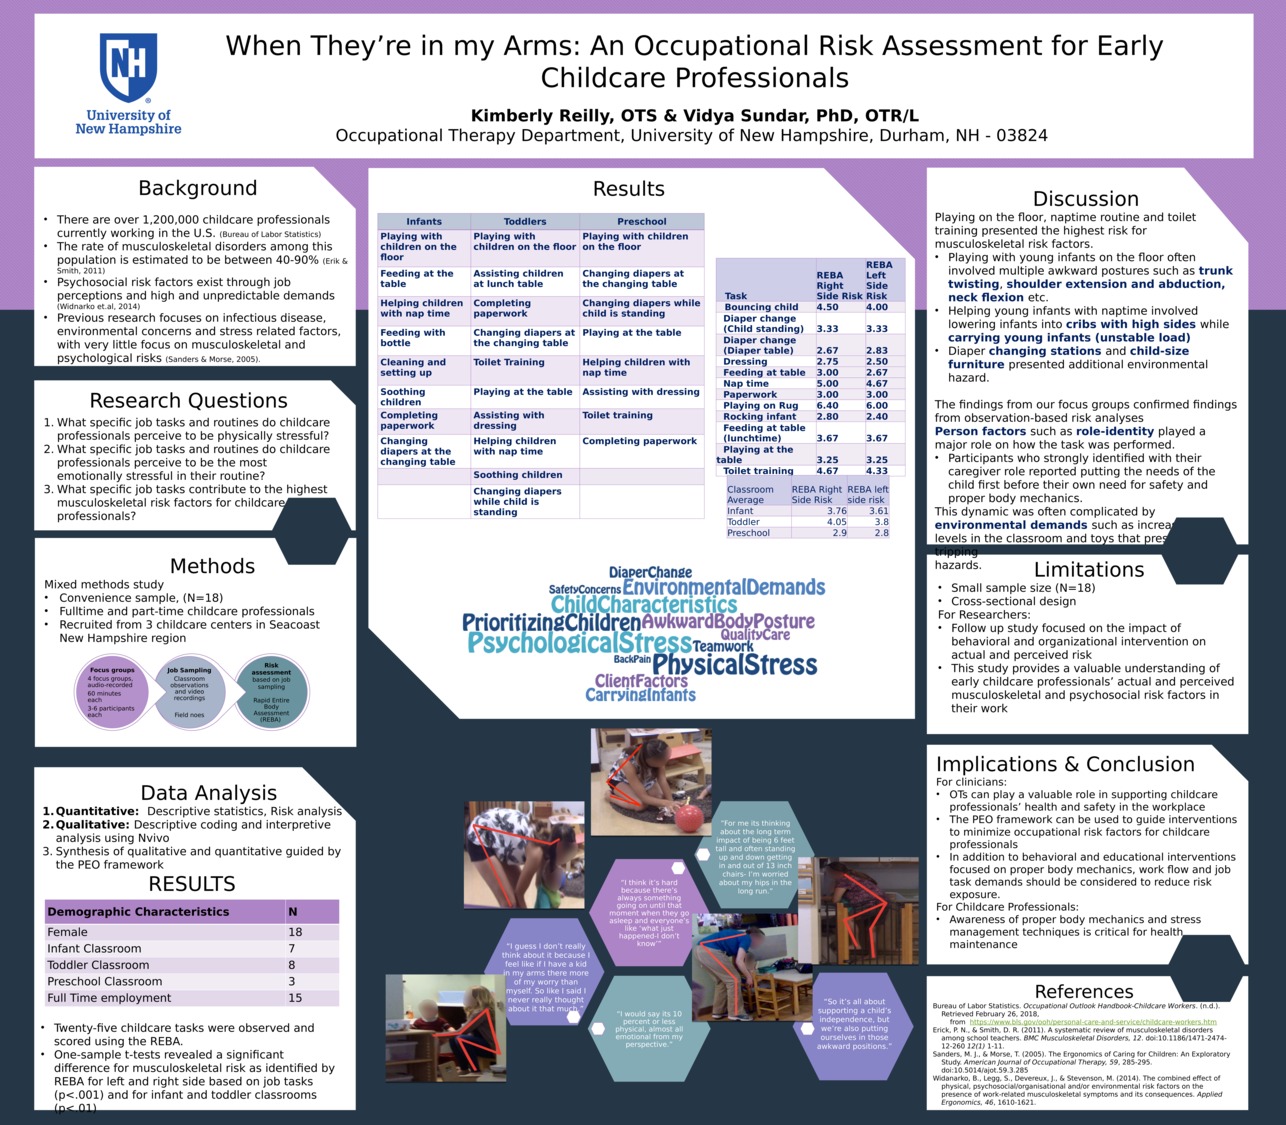 When They're In My Arms: An Occupational Risk Assessment For Early Childcare Professionals by klr1009